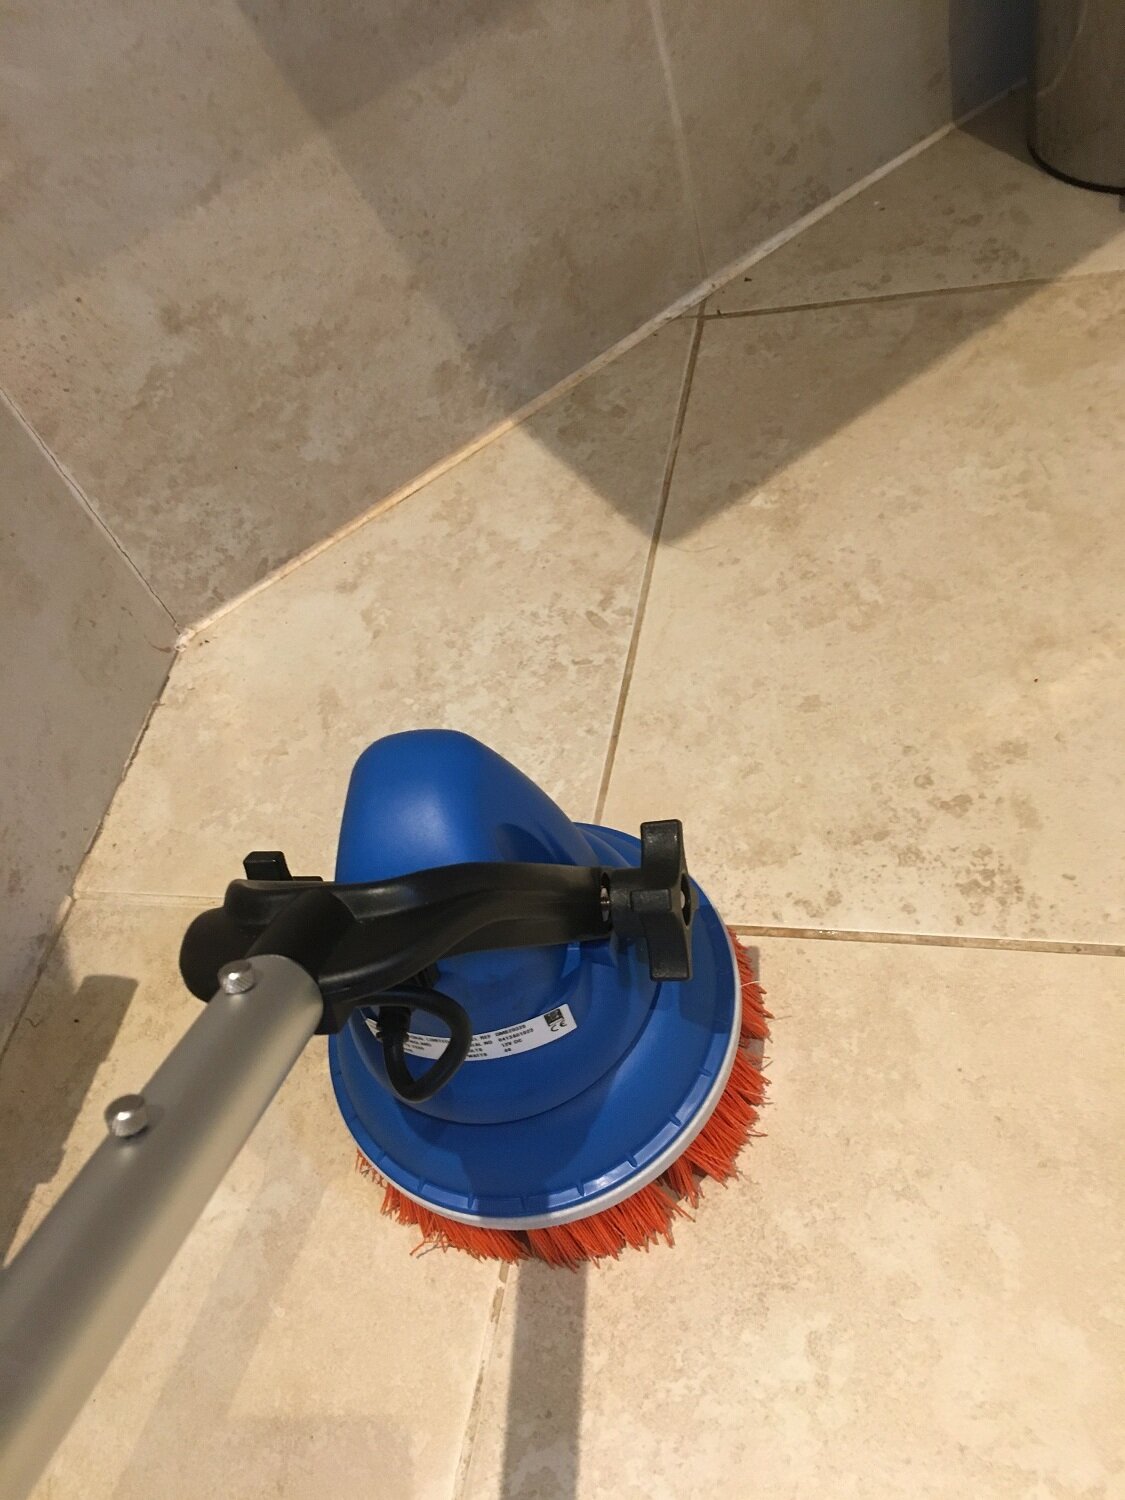 Tile and Grout Cleaning 